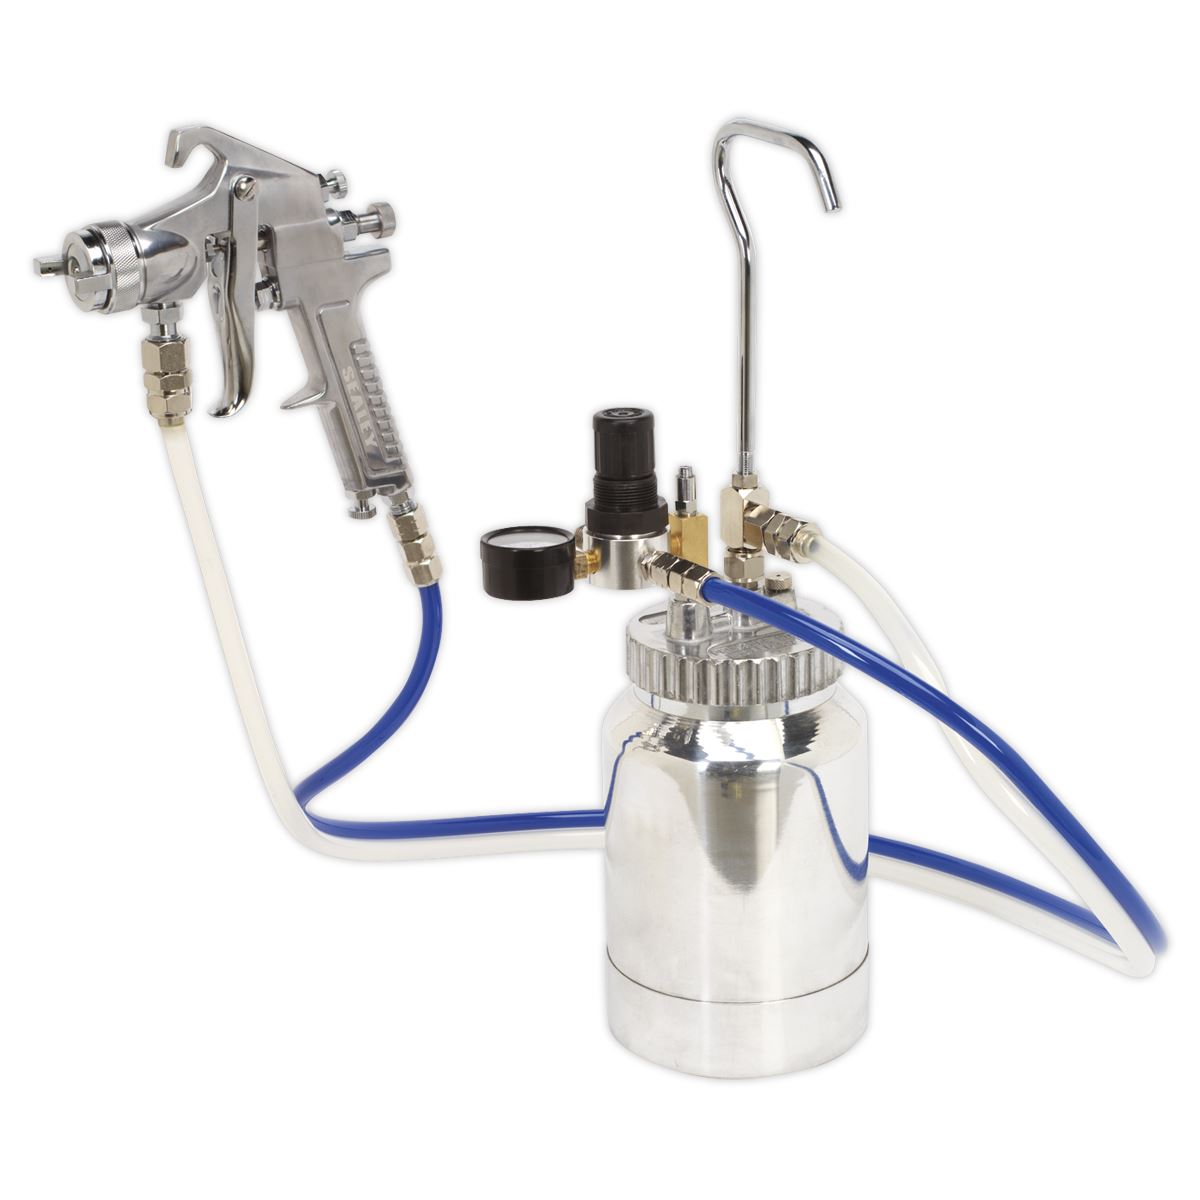 Sealey Pressure Pot System with Spray Gun & Hoses 1.8mm Set-Up